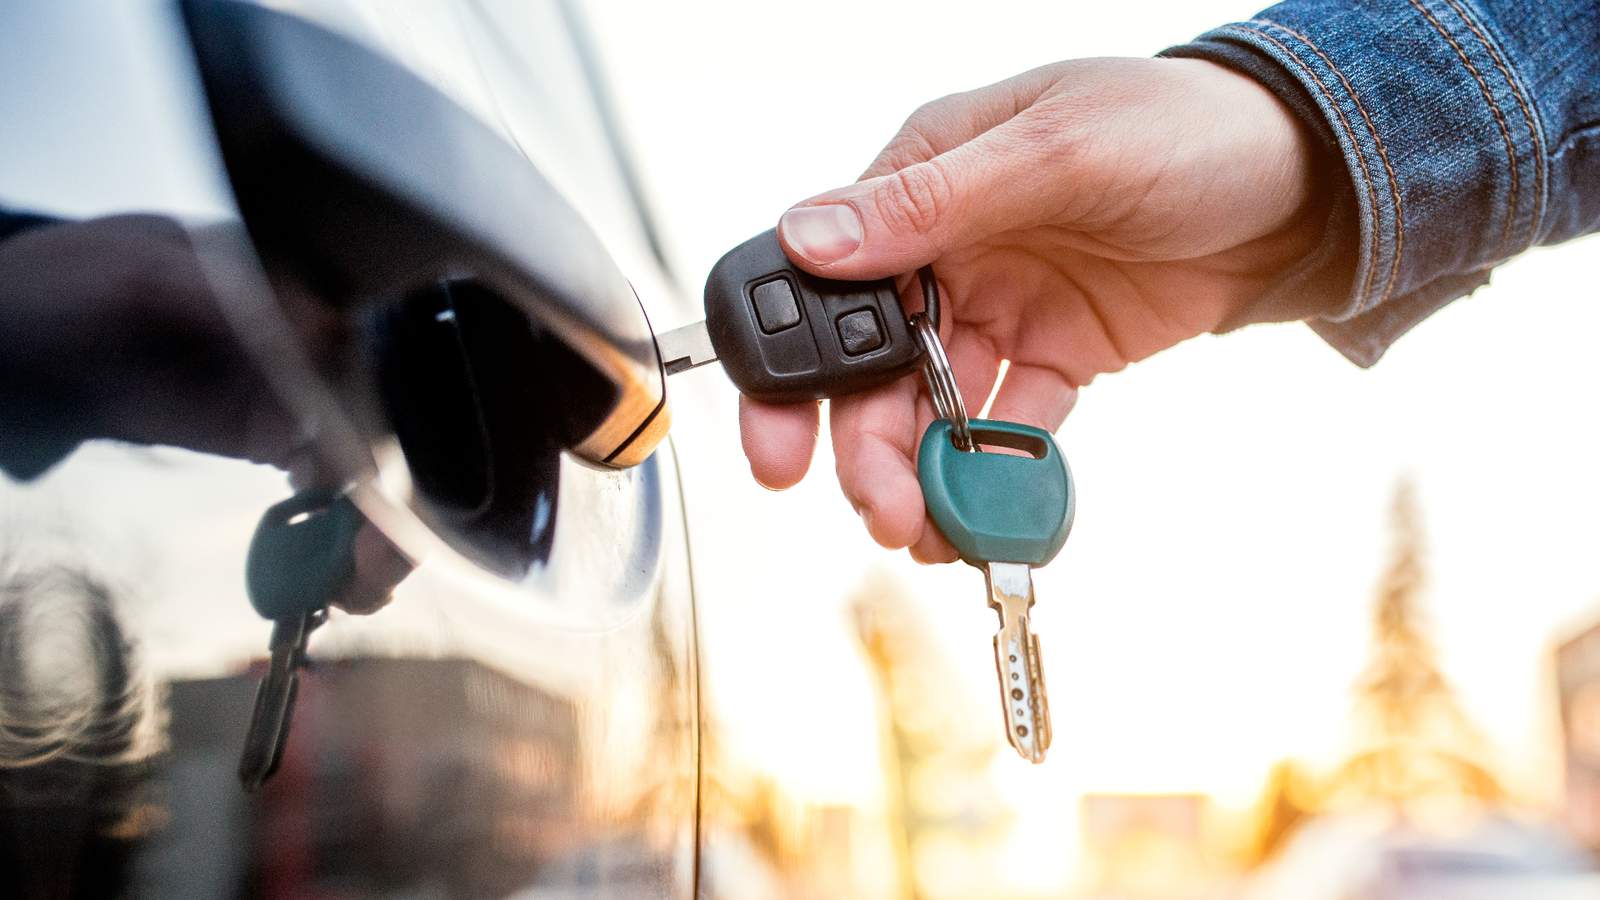 Airbnb for cars: Here is how you can rent your car for extra income